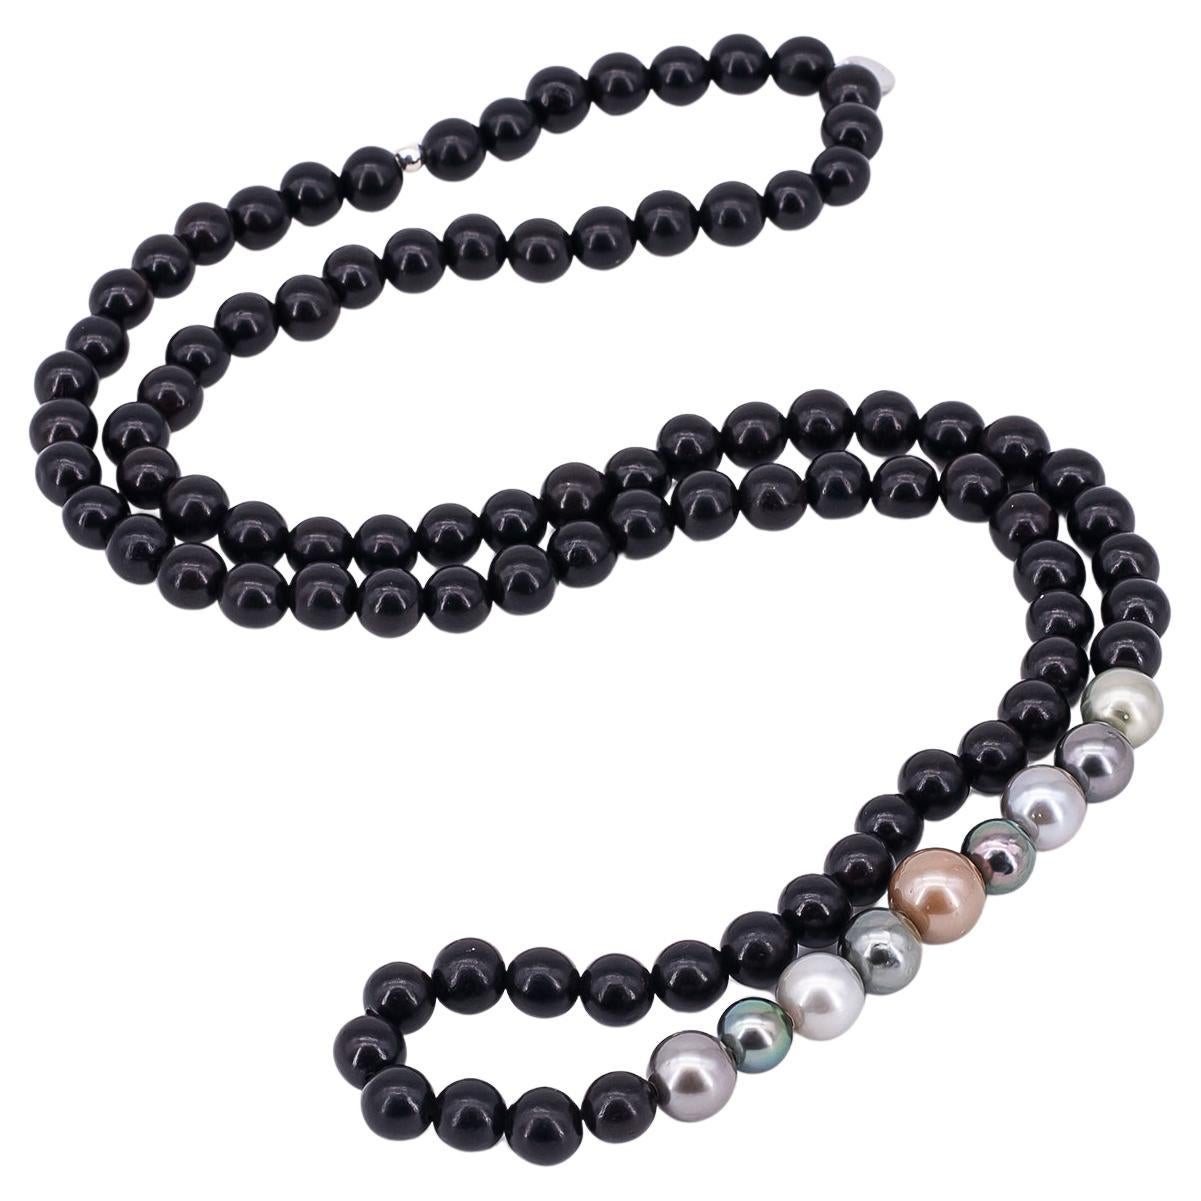 Prayer bracelet/necklace with ebony beads and Tahiti pearls For Sale